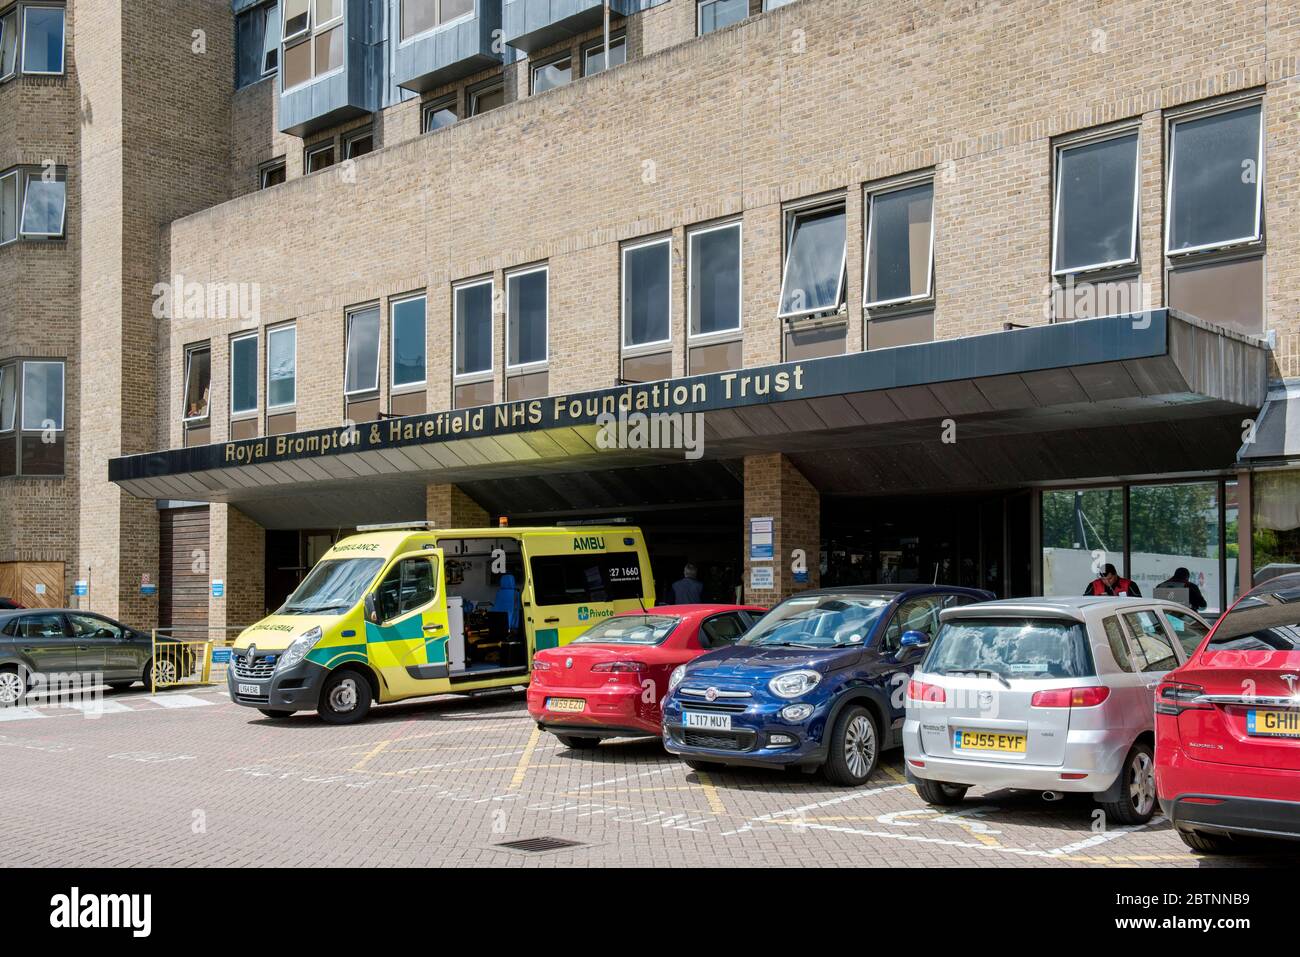 Royal Brompton Hospital & Harefield NHS Foundation Trust, with cars and ambulance parked outside, London Borough of Chelsea Stock Photo